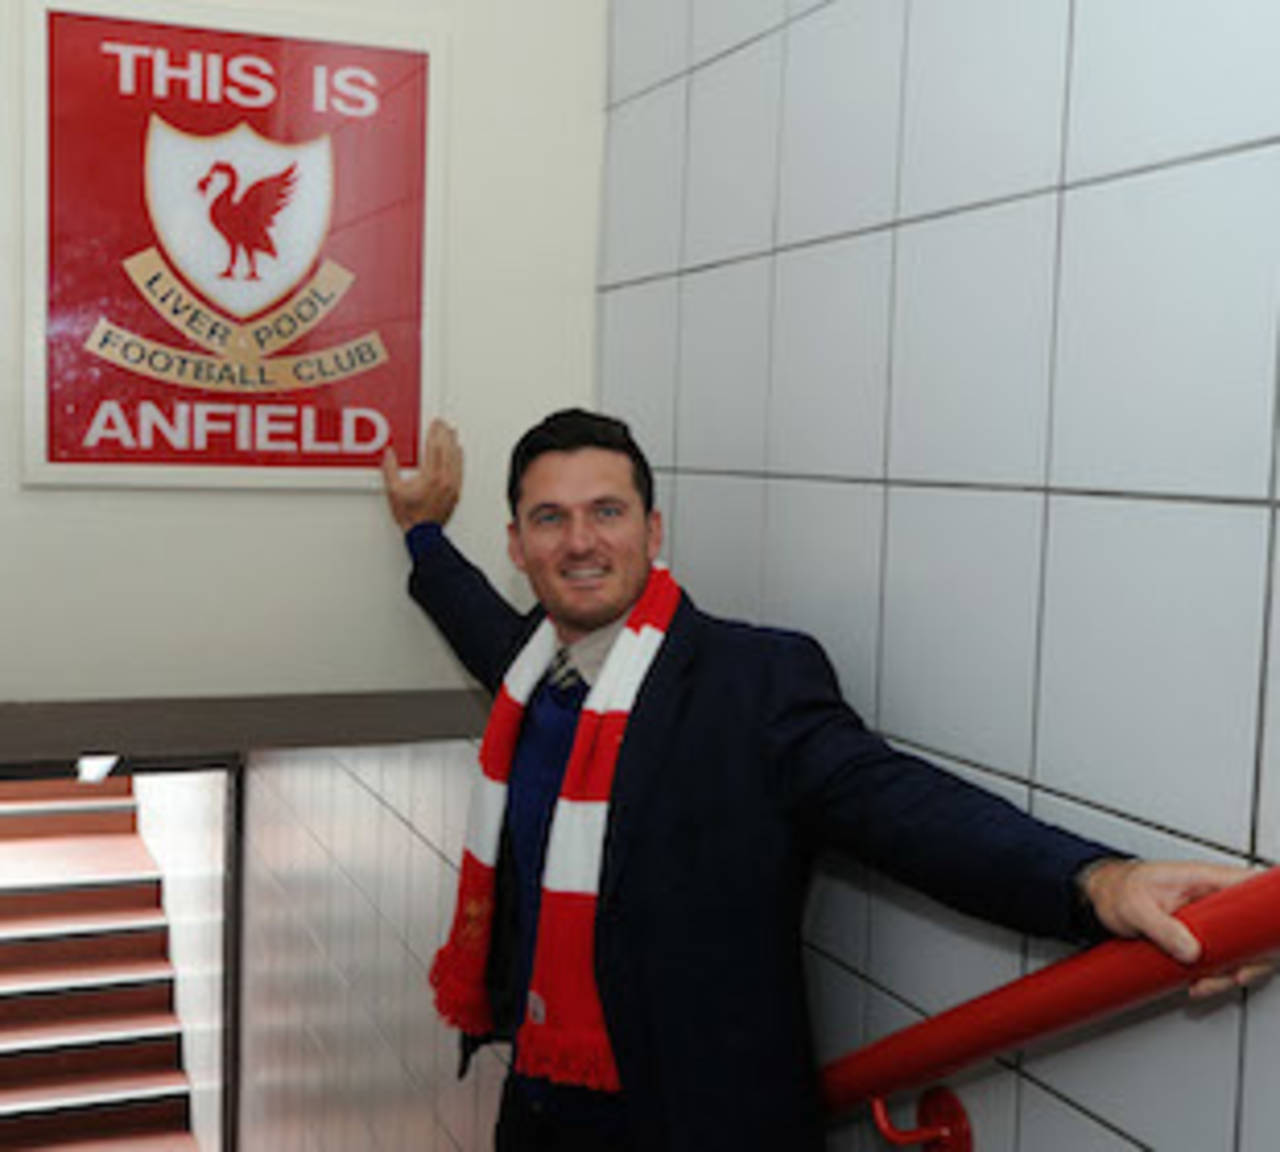 Graeme Smith has not taken up commentary or coaching, like several former cricketers do&nbsp;&nbsp;&bull;&nbsp;&nbsp;Liverpool FC